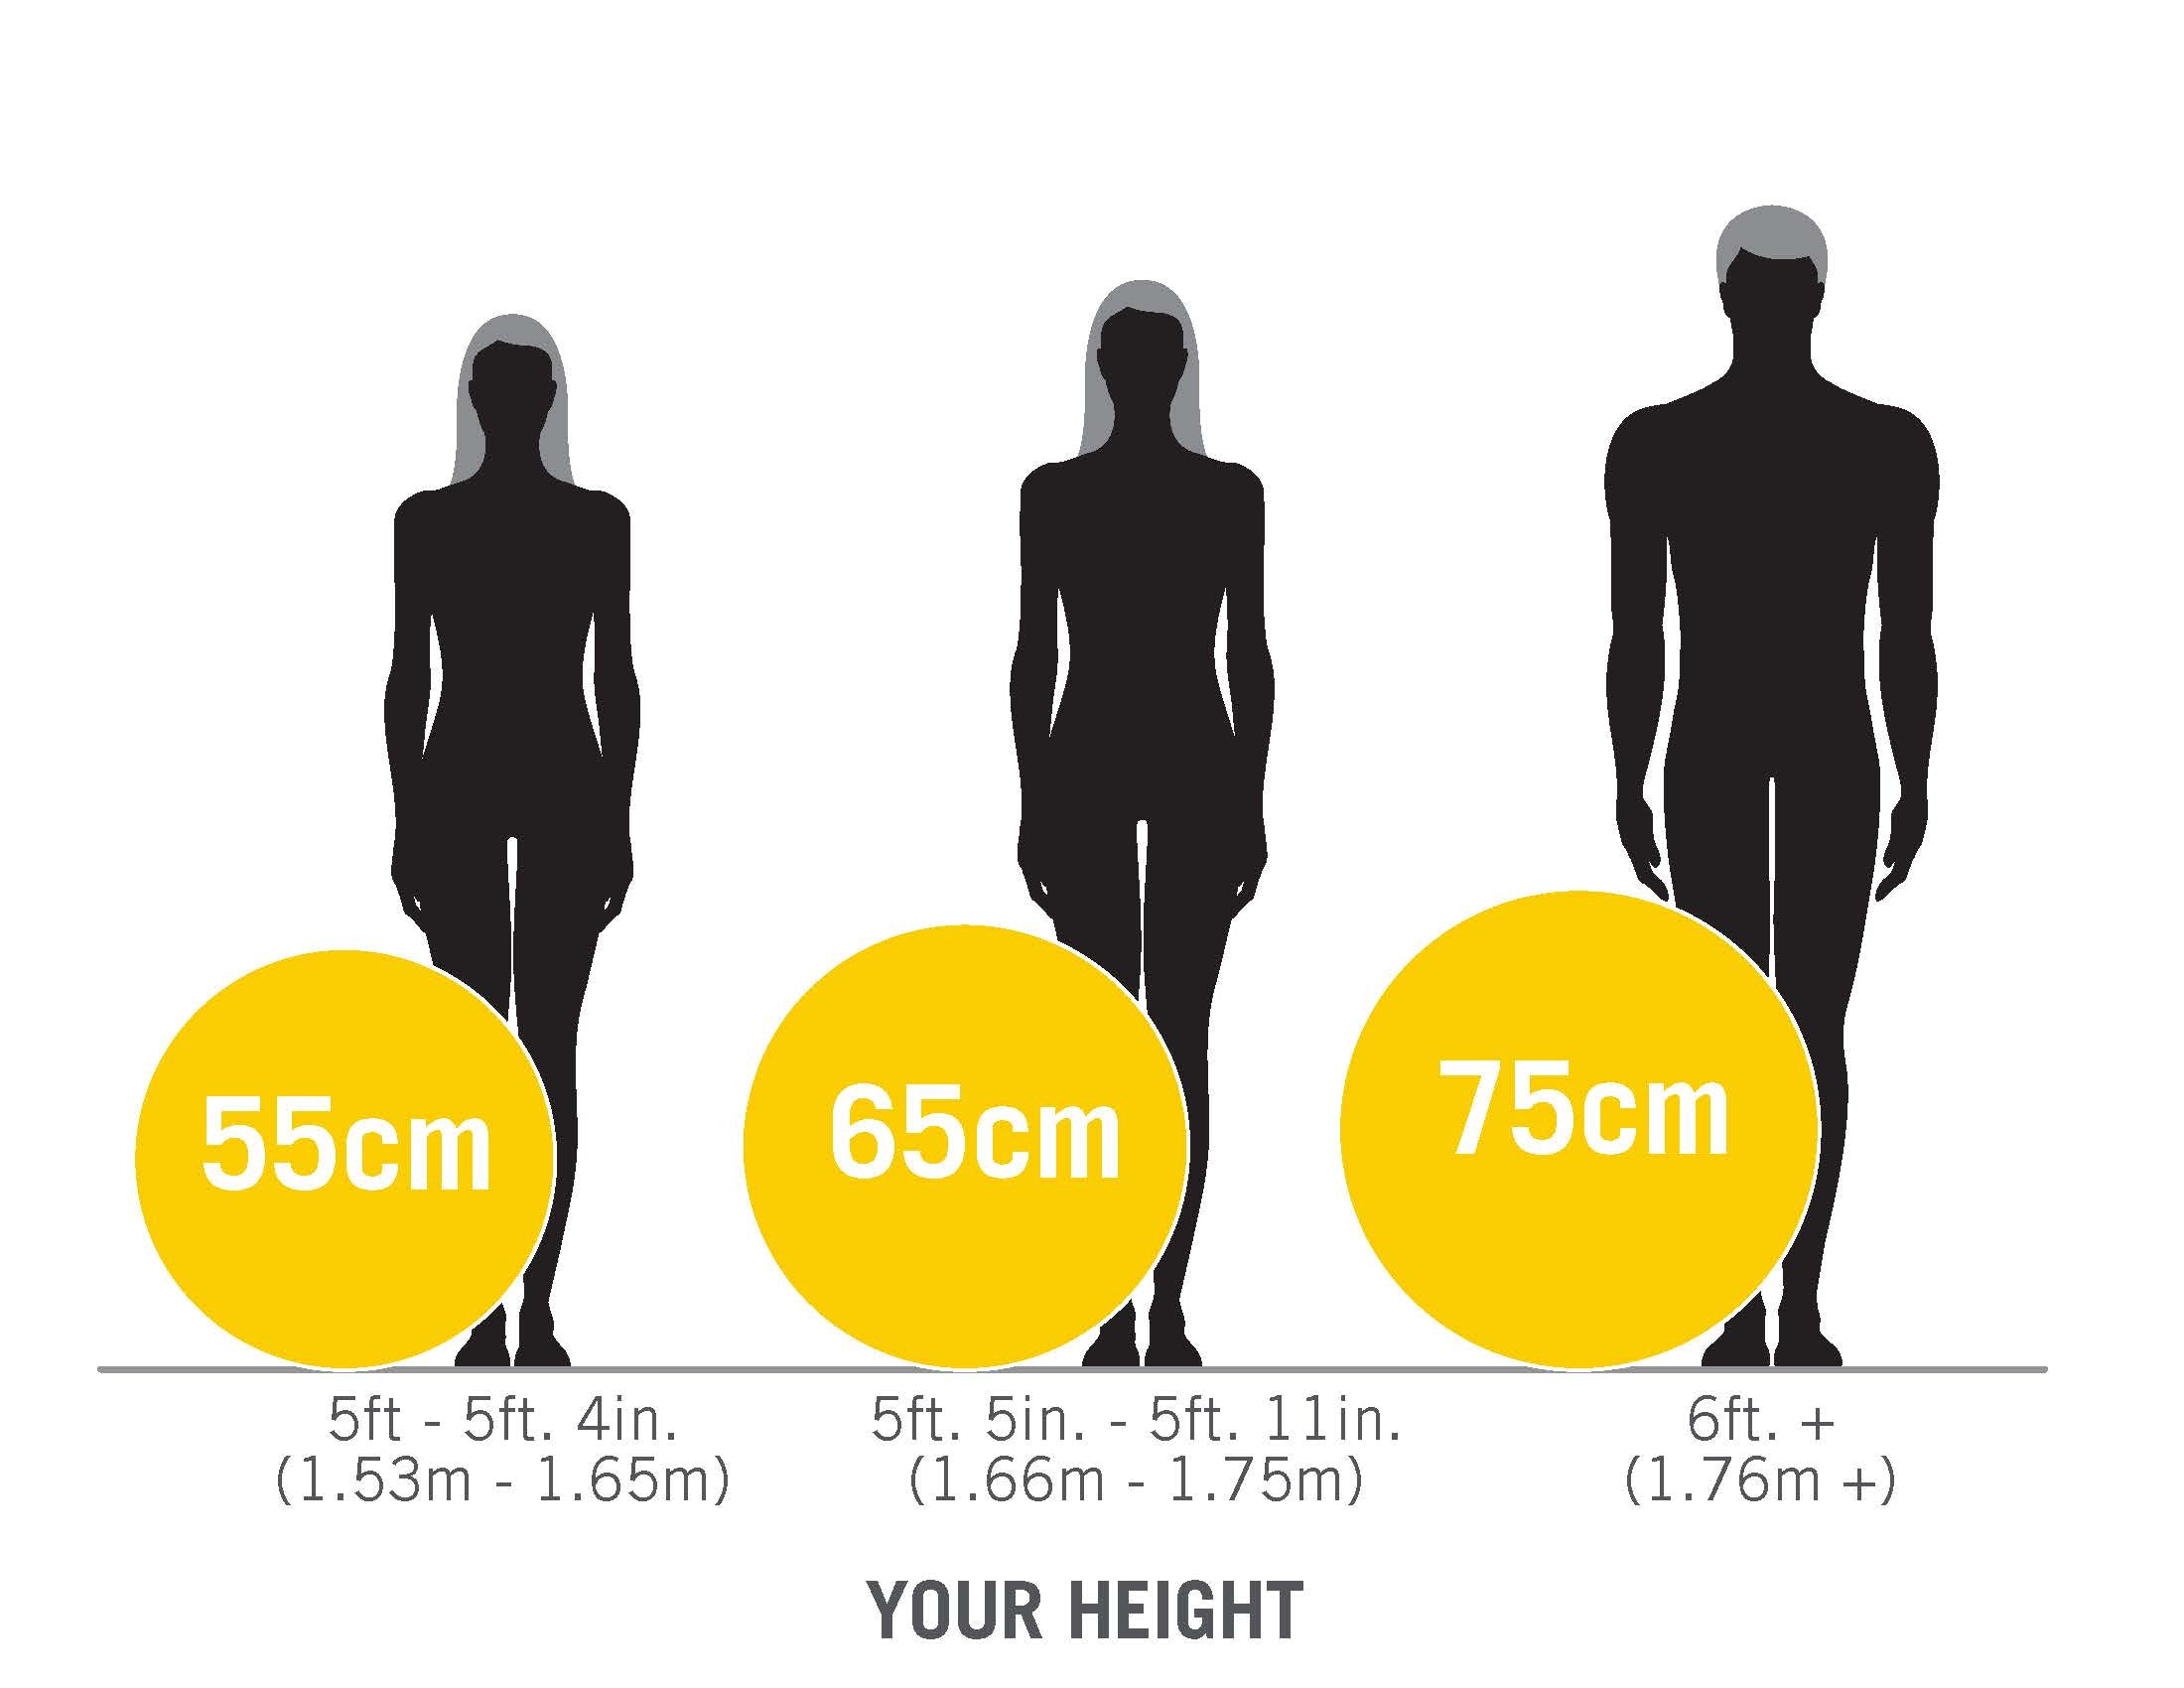 Everlast Fitness Ball Size Guide